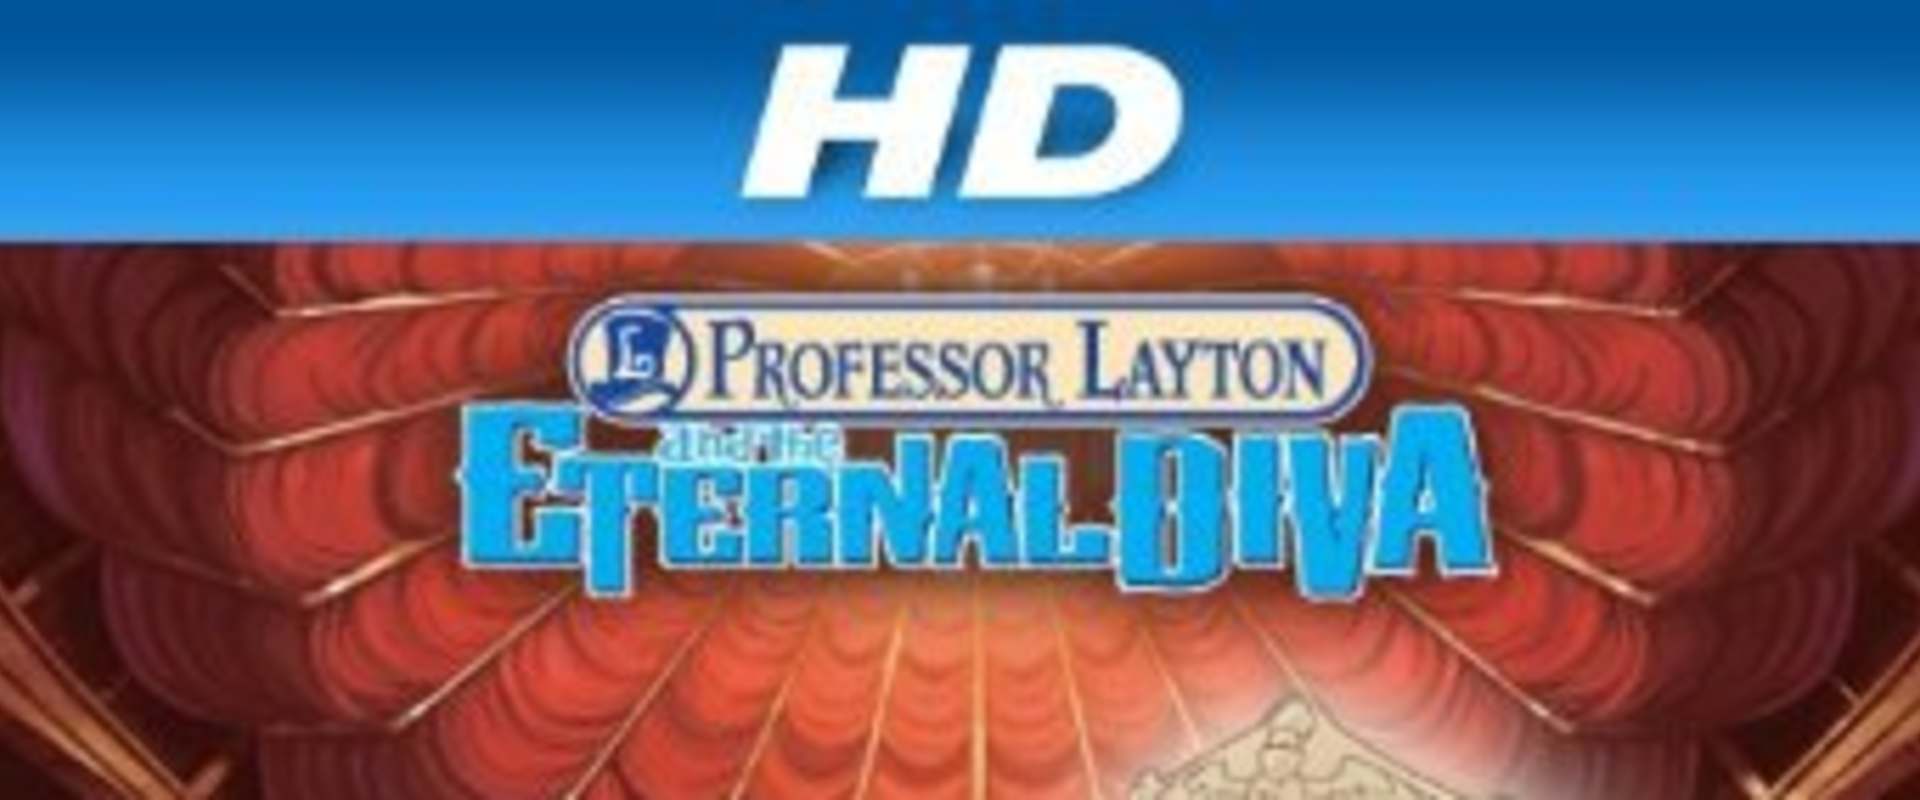 Professor Layton and the Eternal Diva background 1